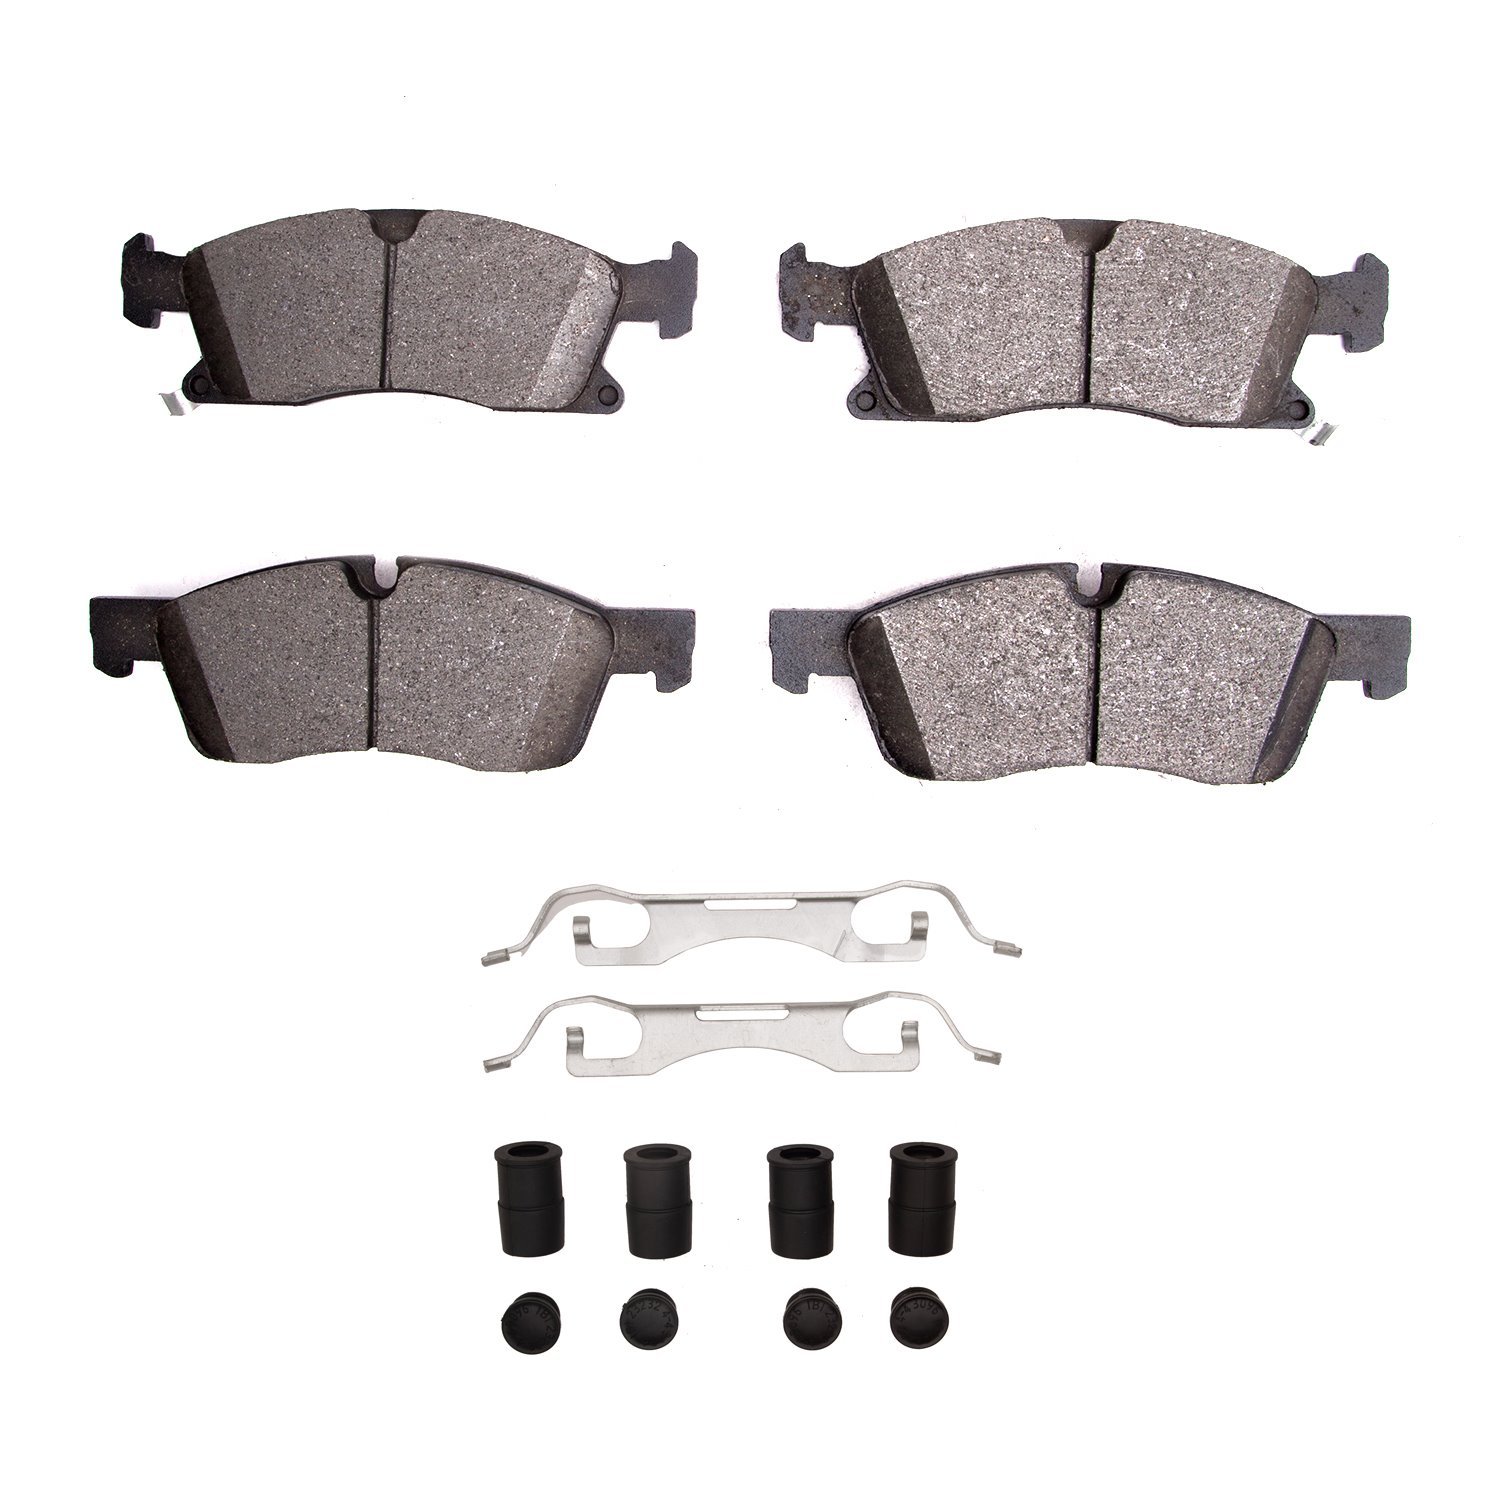 1214-1904-11 Heavy-Duty Brake Pads & Hardware Kit, Fits Select Multiple Makes/Models, Position: Front